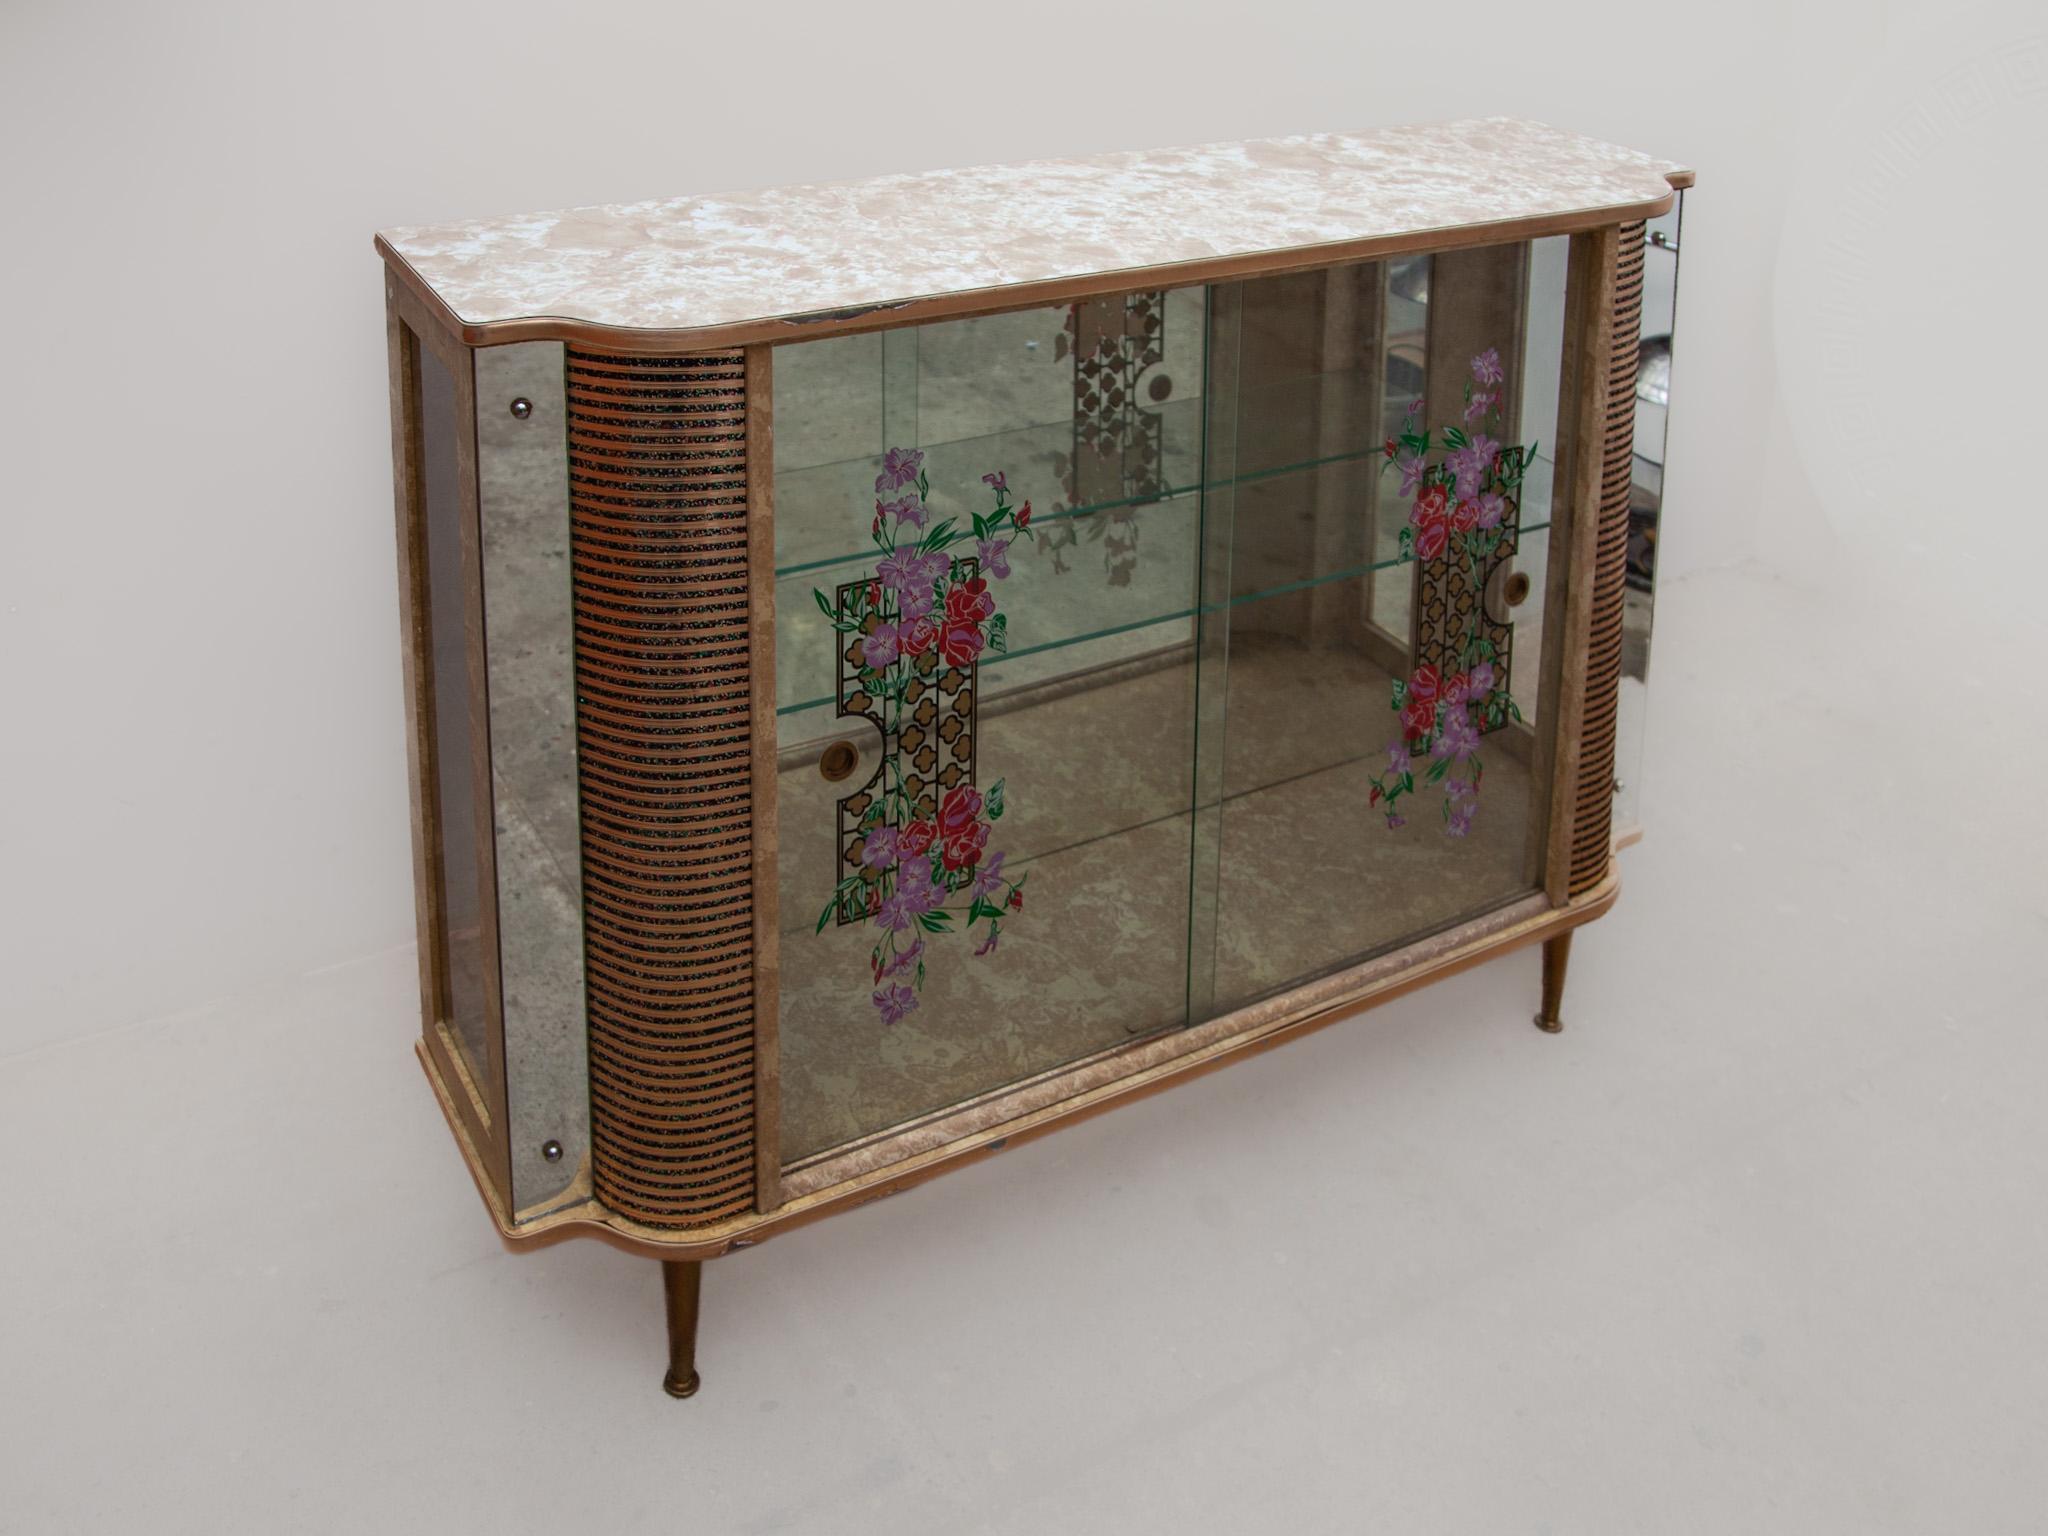 English  Vintage Glass Bar, Coctail, Display Cabinet with Shelves, 1950s